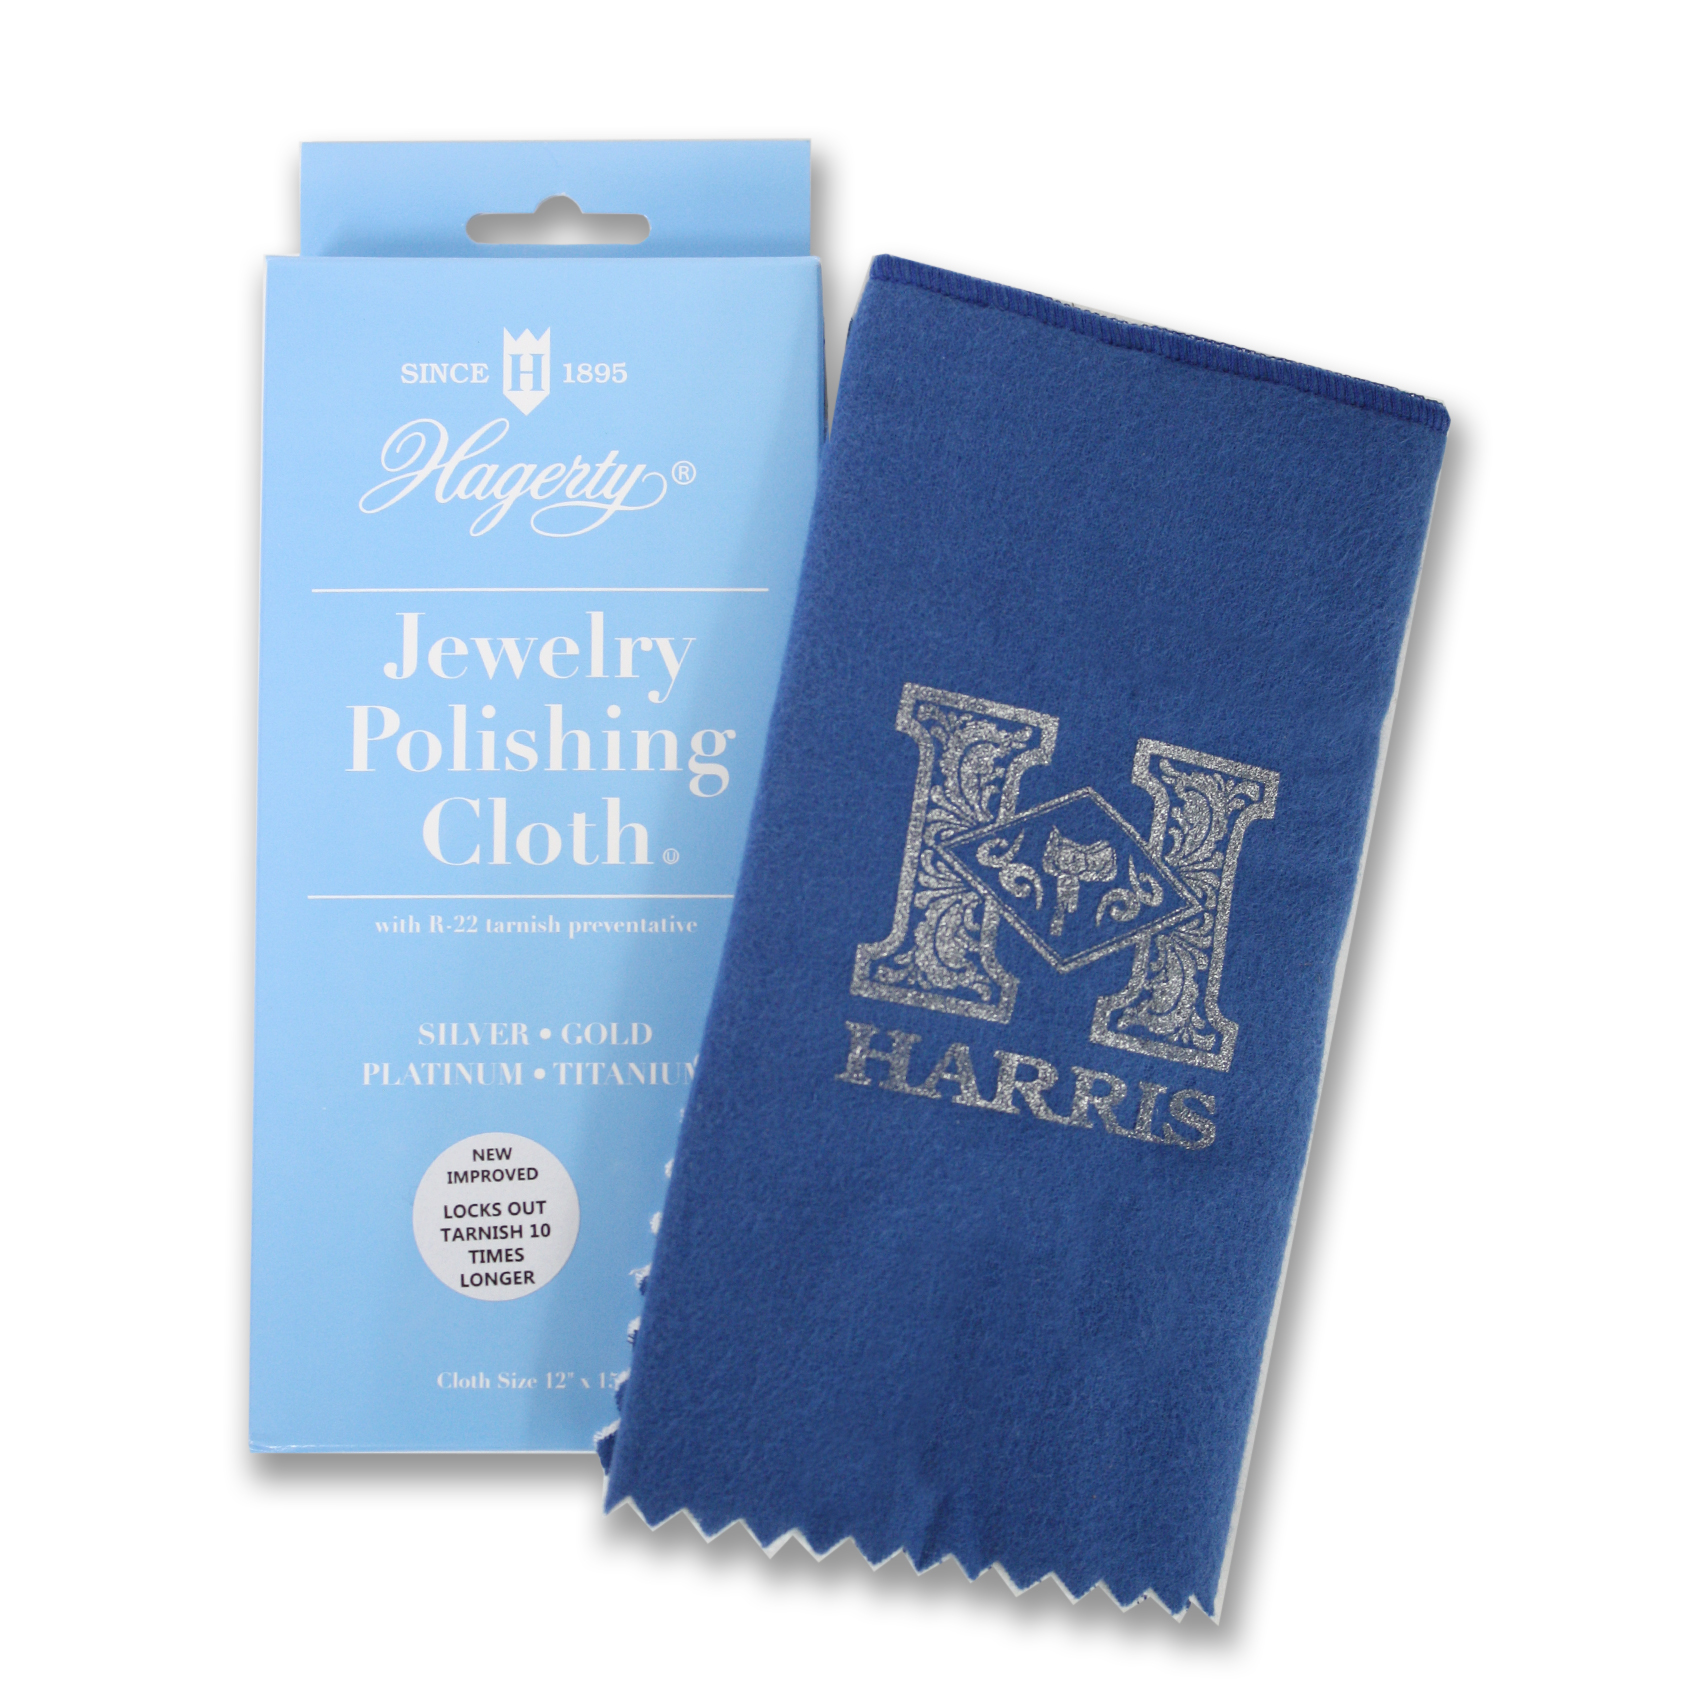 Hagerty Jewelry Polishing Cloth  removes tarnish from silver and gold